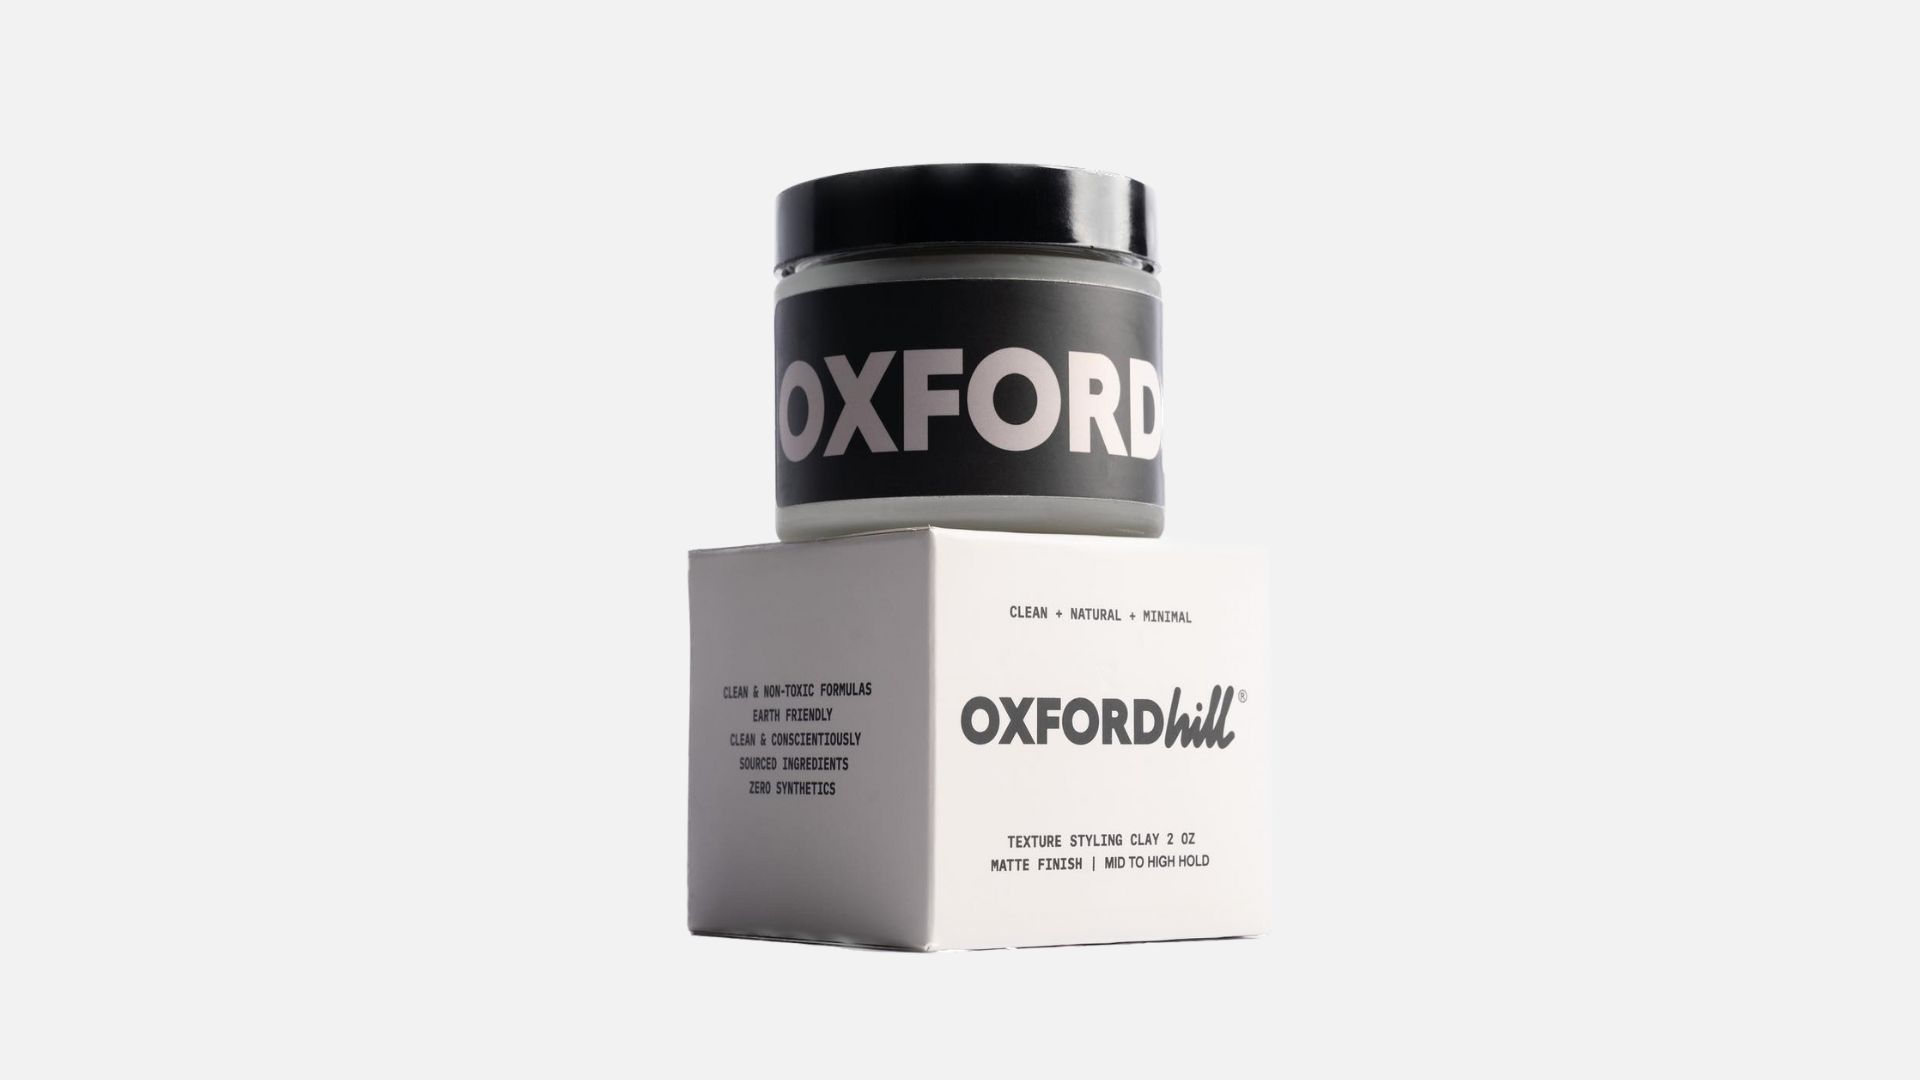 Oxford Hill Textured Clay Pomade